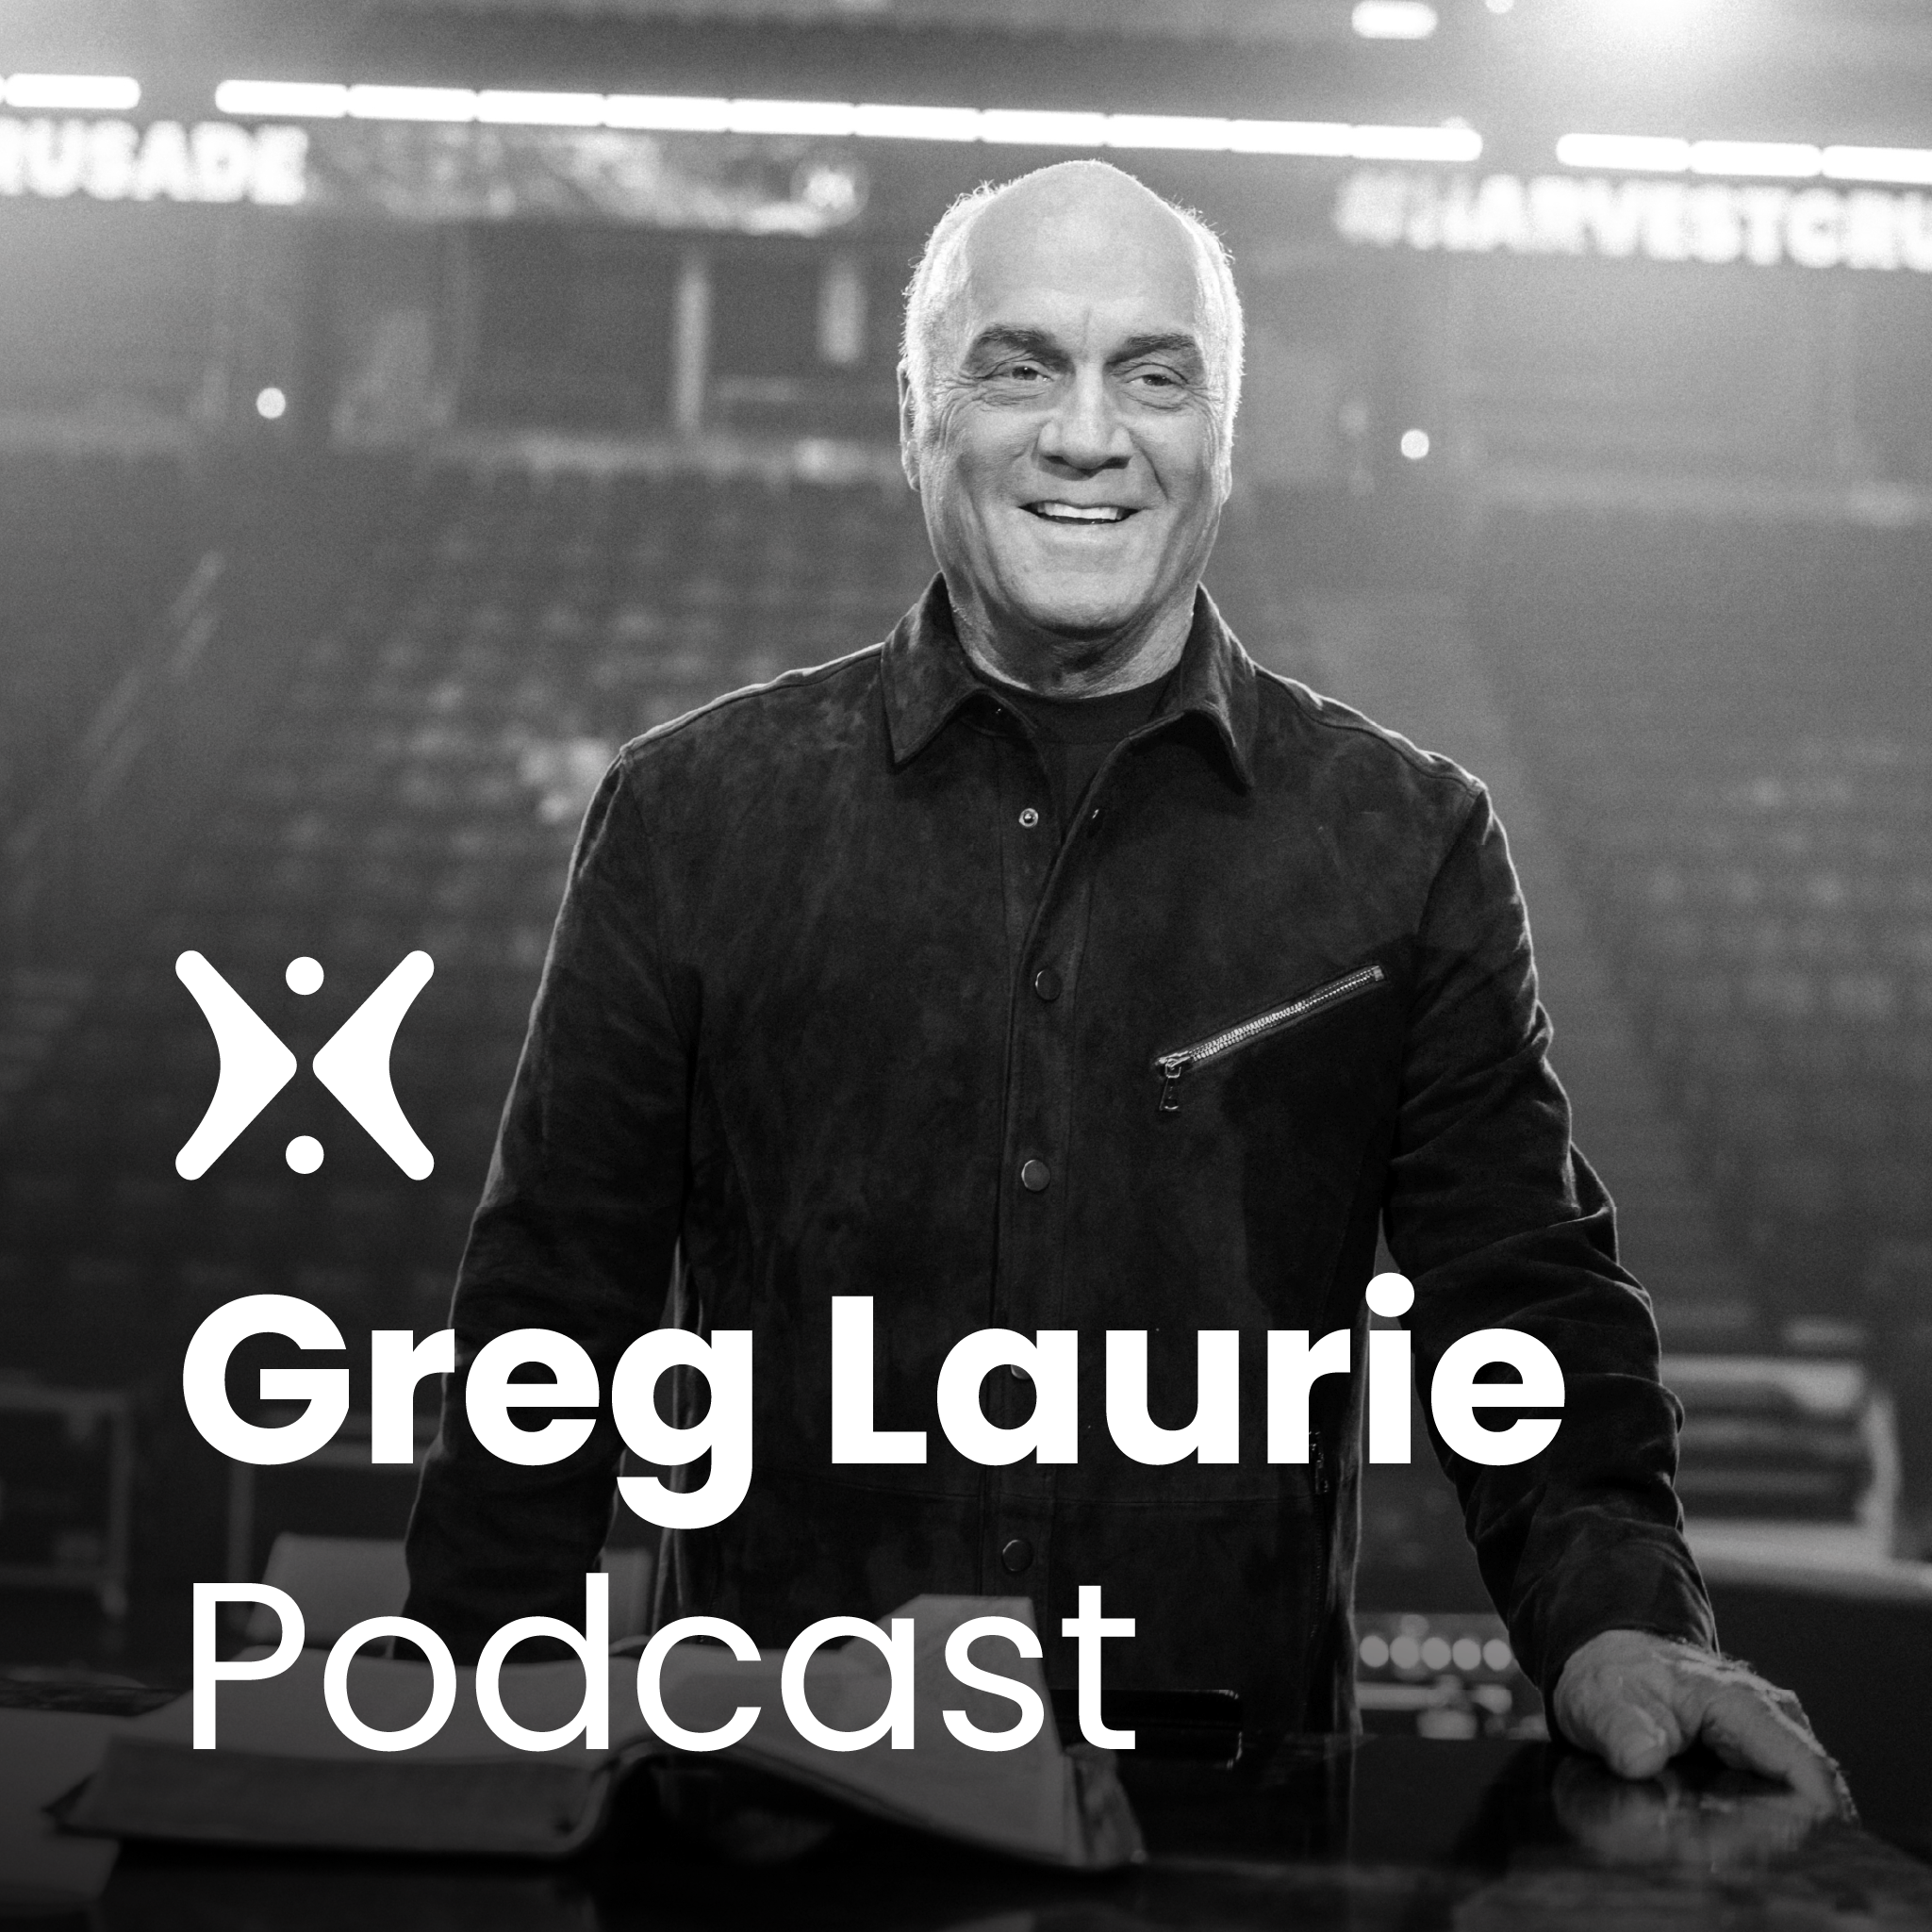 A Movie for Our Time | Ed Stetzer Interviews Greg Laurie on ‘Jesus Revolution’